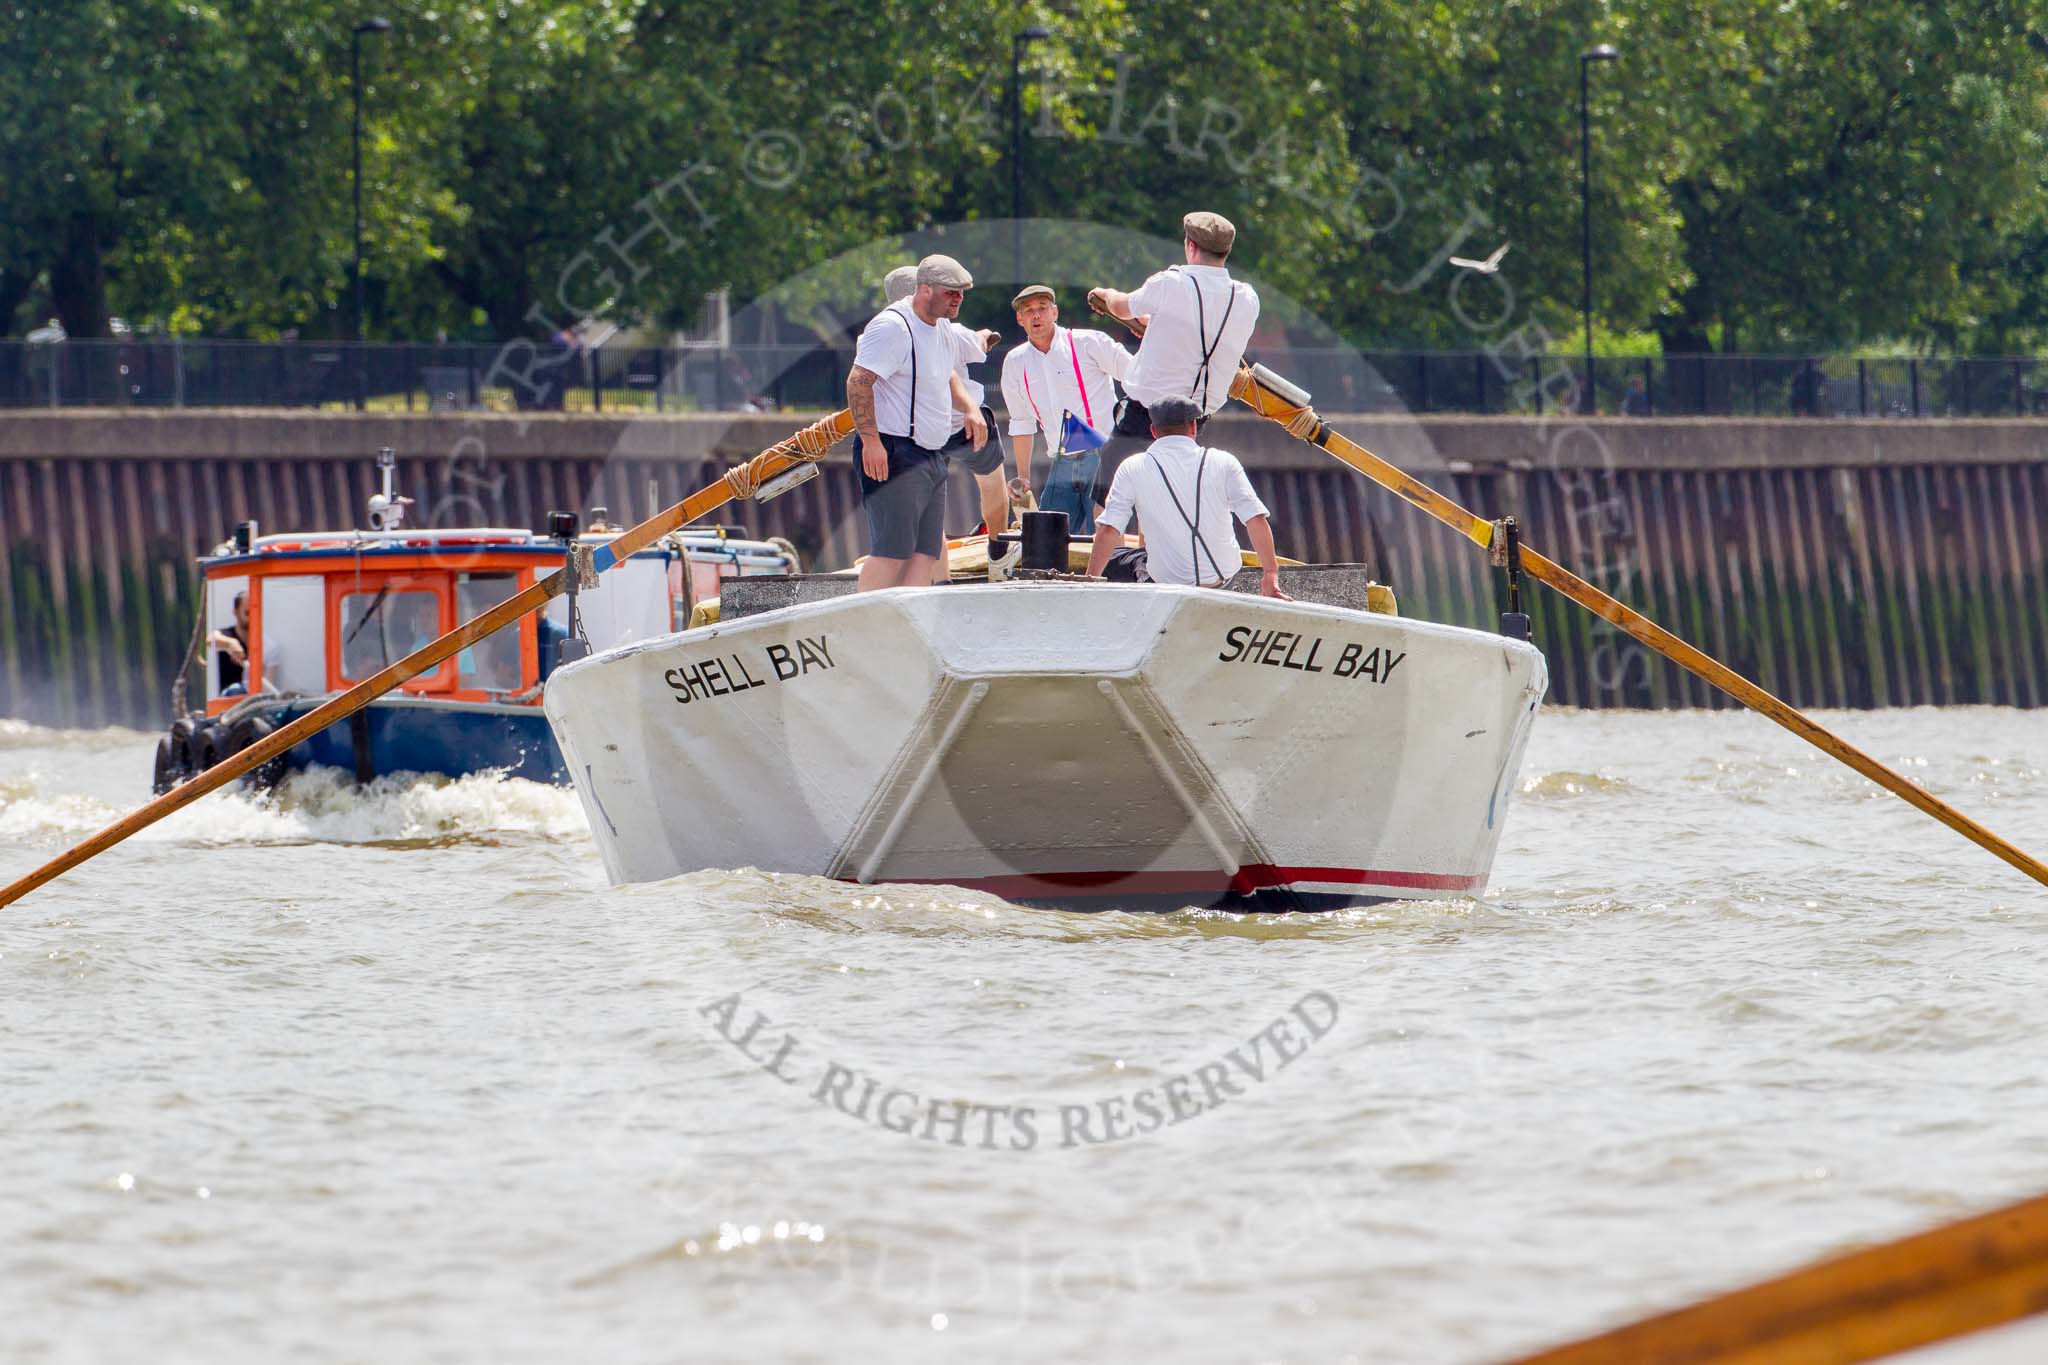 TOW River Thames Barge Driving Race 2014.
River Thames between Greenwich and Westminster,
London,

United Kingdom,
on 28 June 2014 at 12:48, image #142